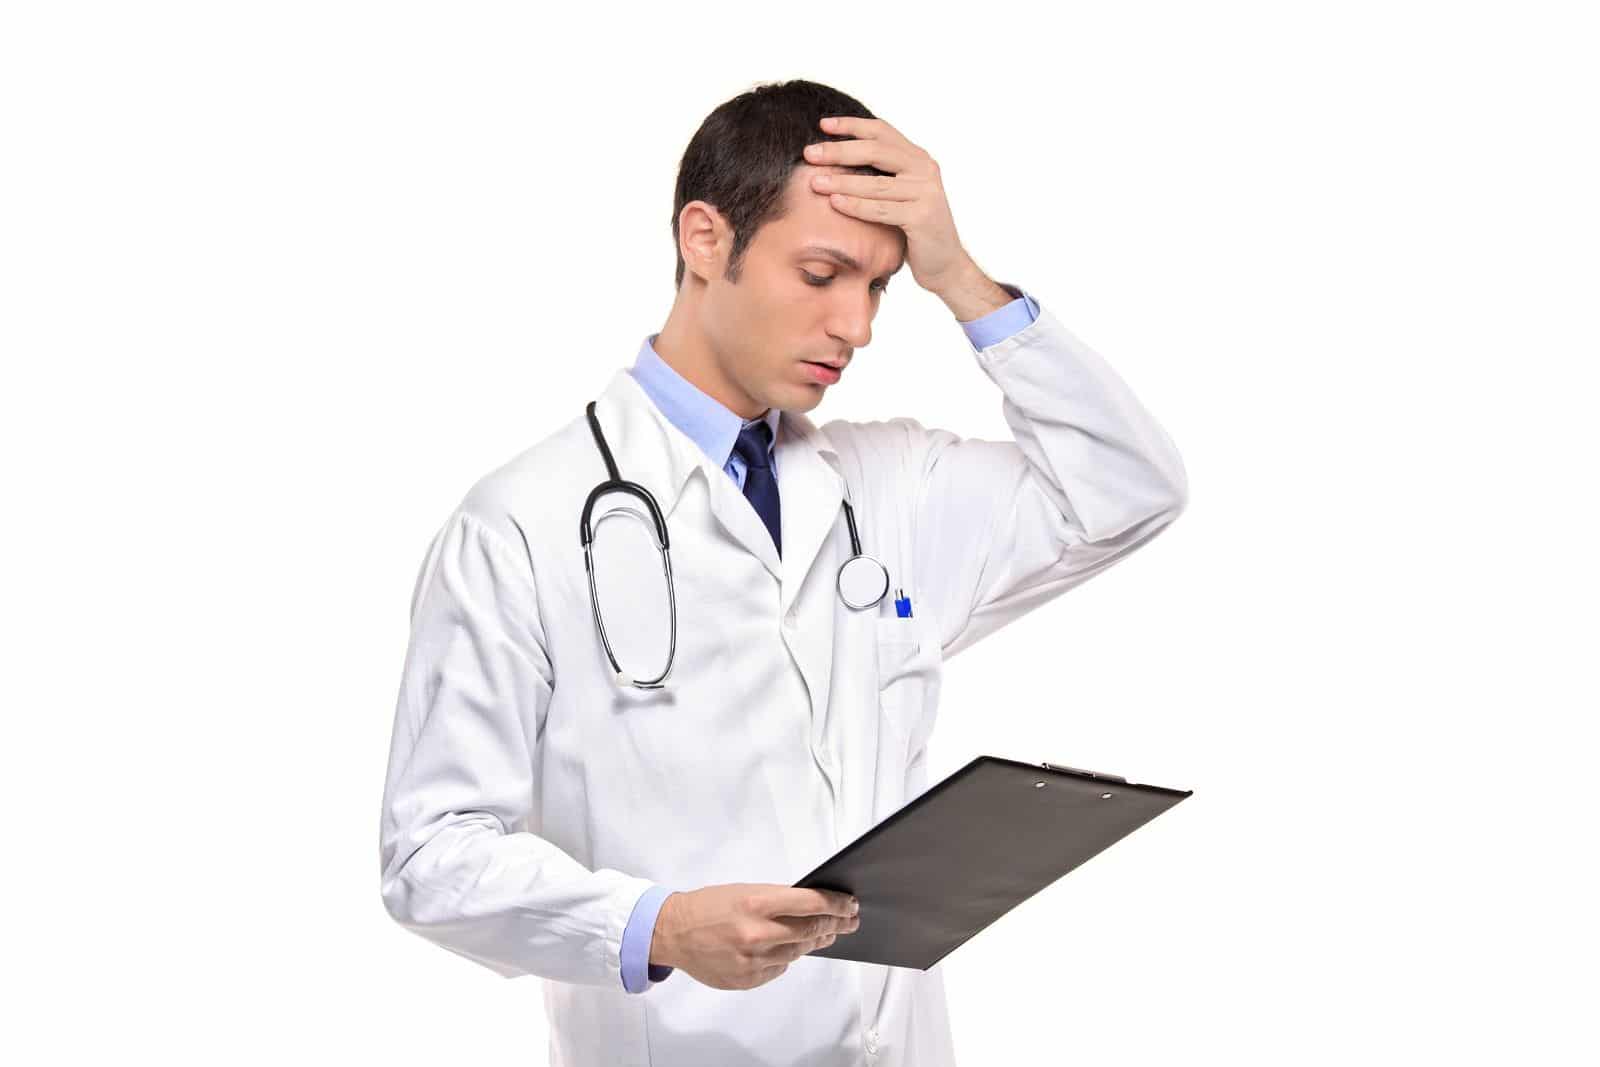 3 Situations When You'll Need Help from Medical Malpractice Lawyers